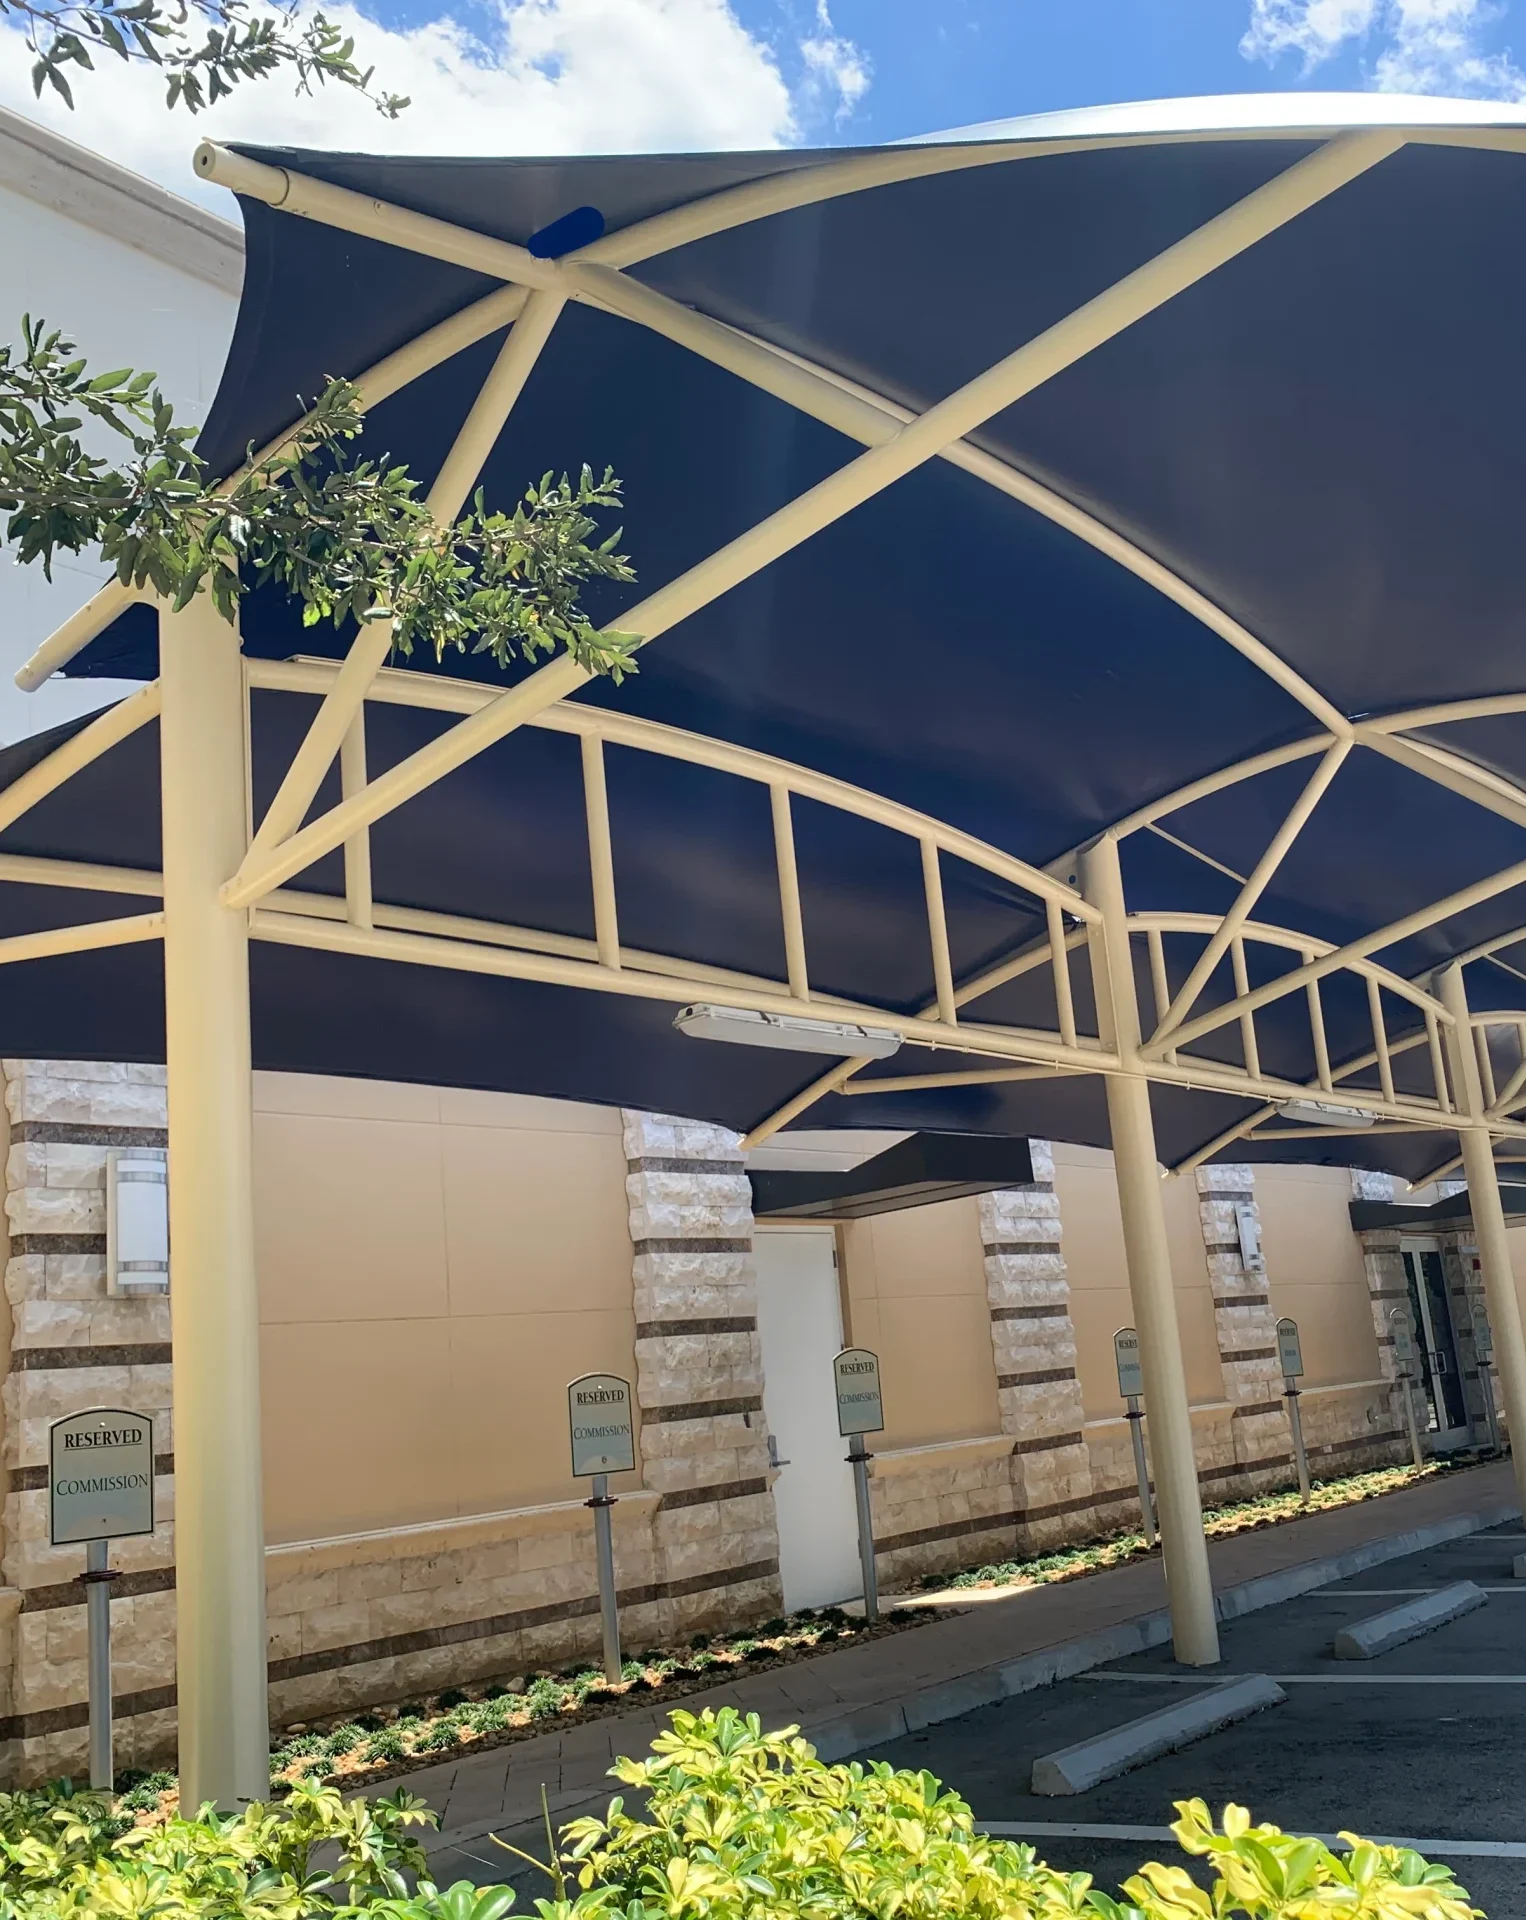 shade Structure over a parking lot